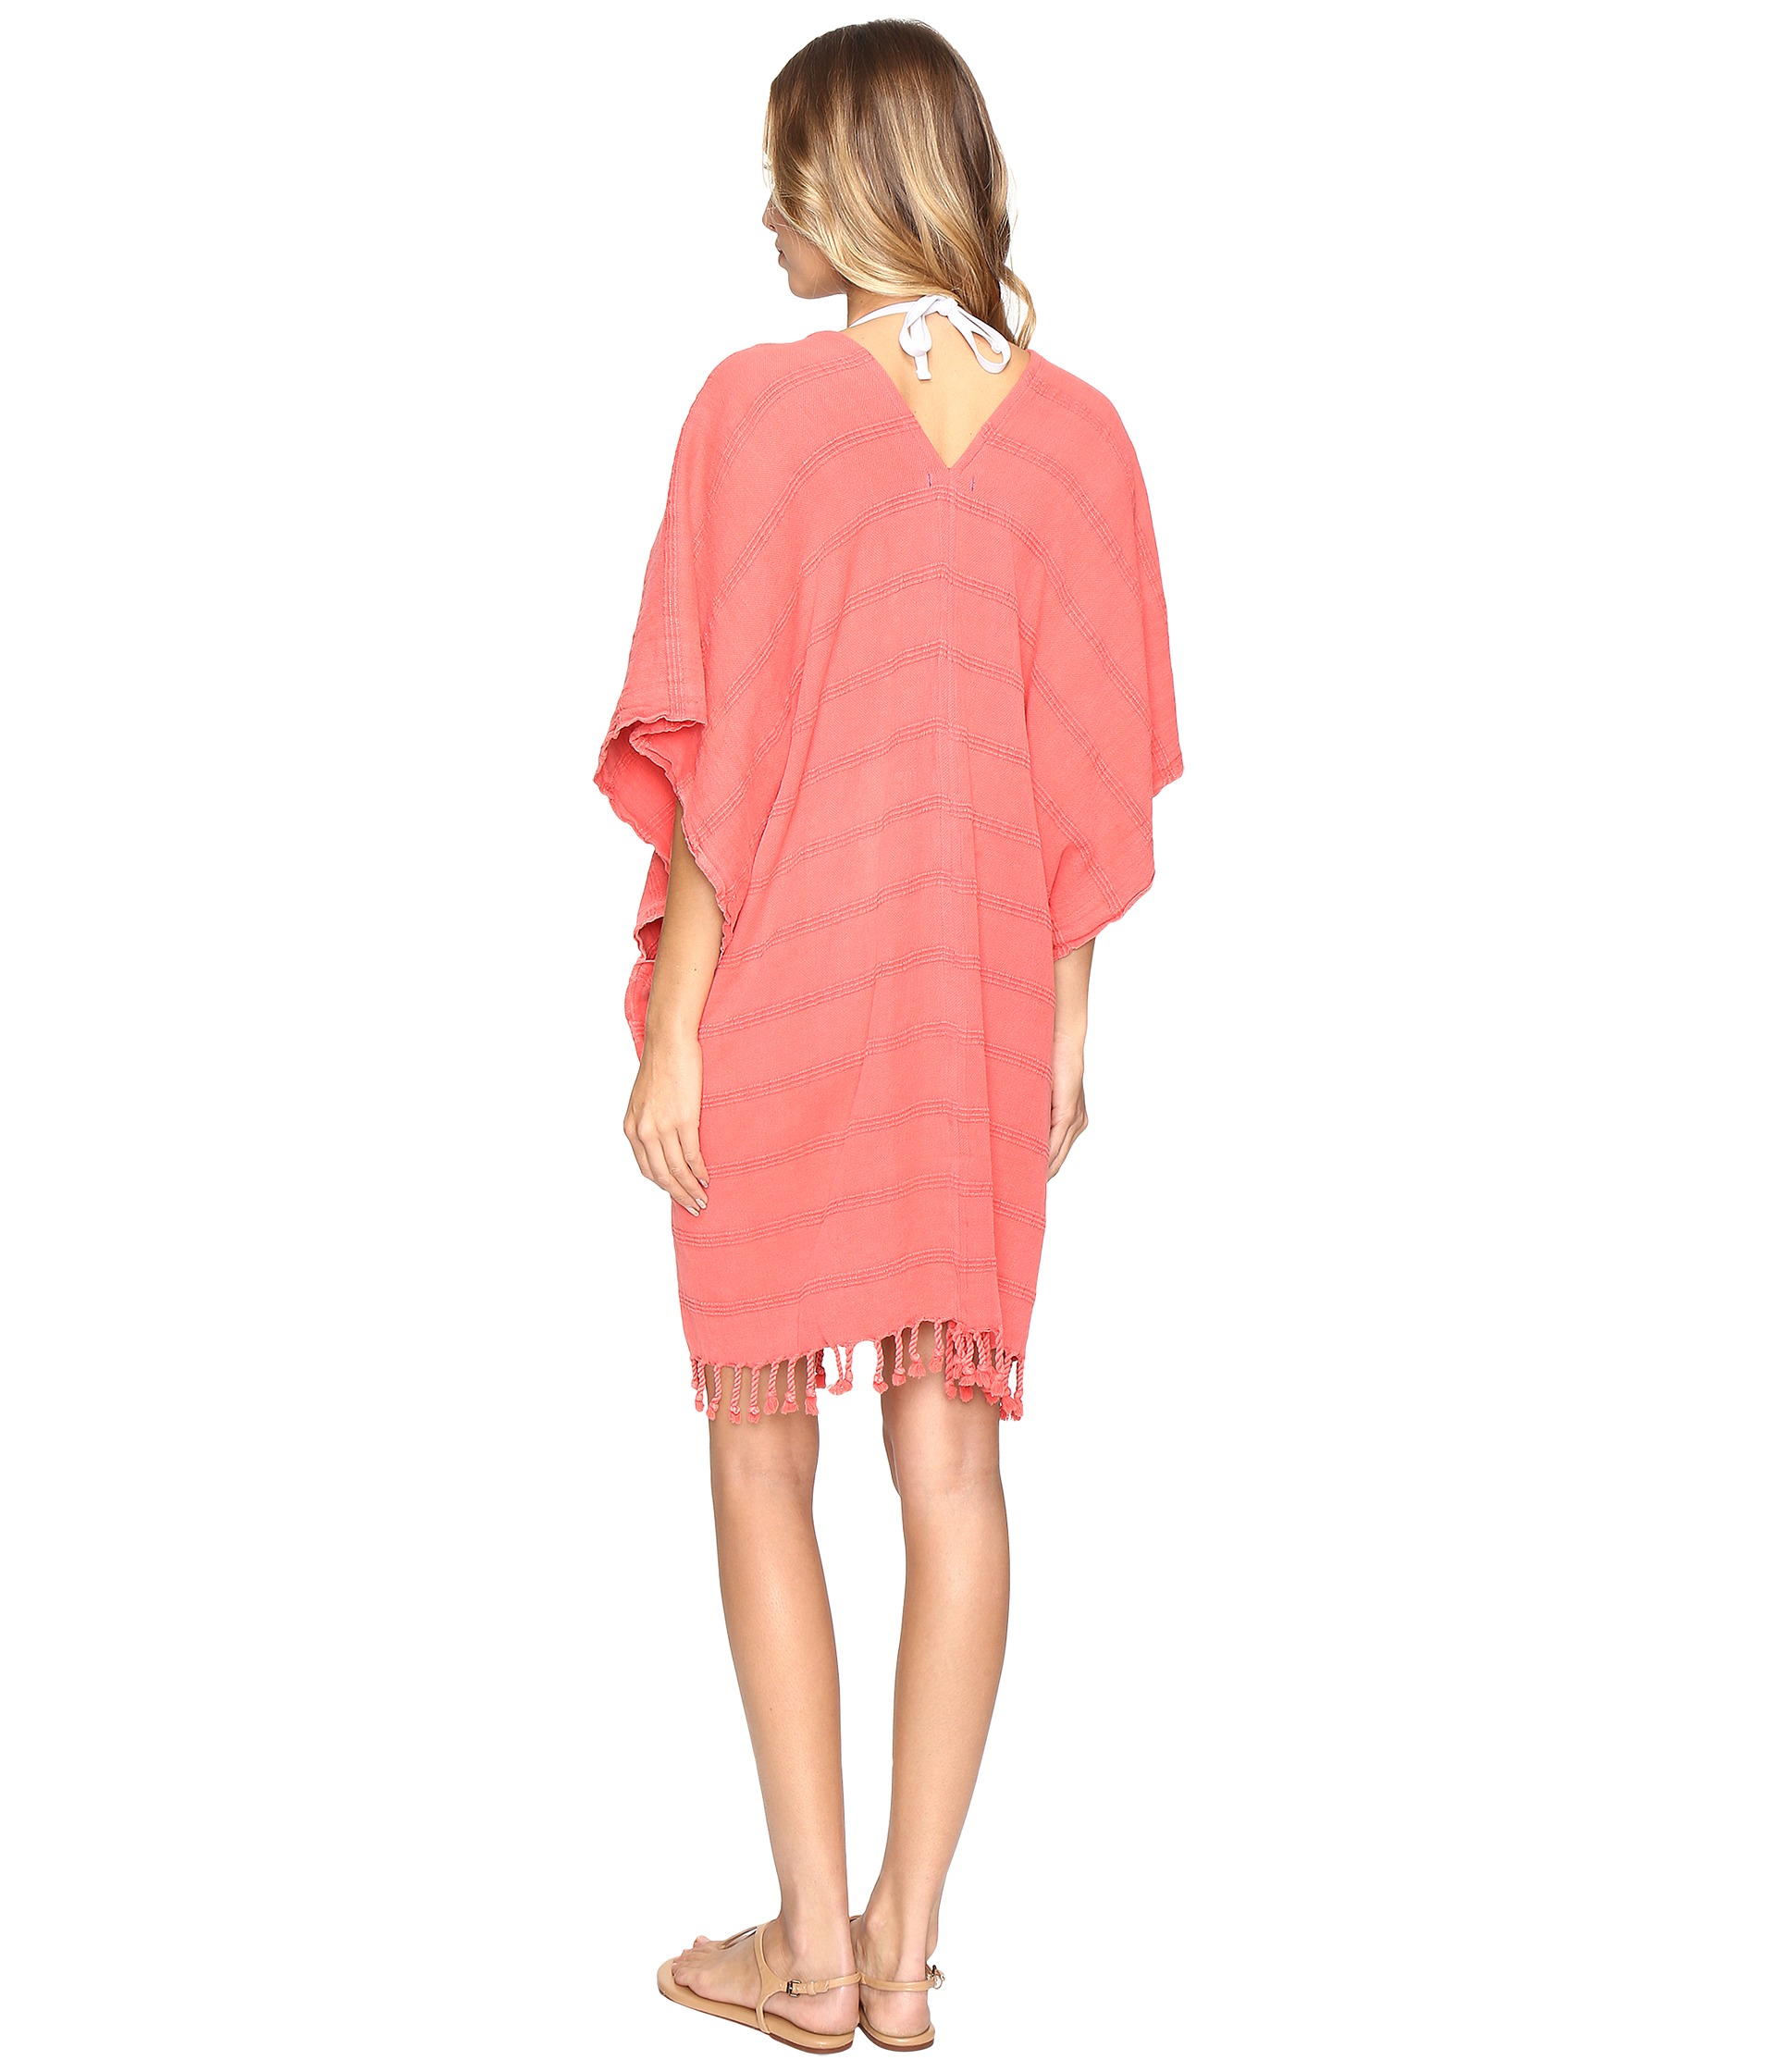 Hat Attack Beach Poncho Cover-Up at Zappos.com